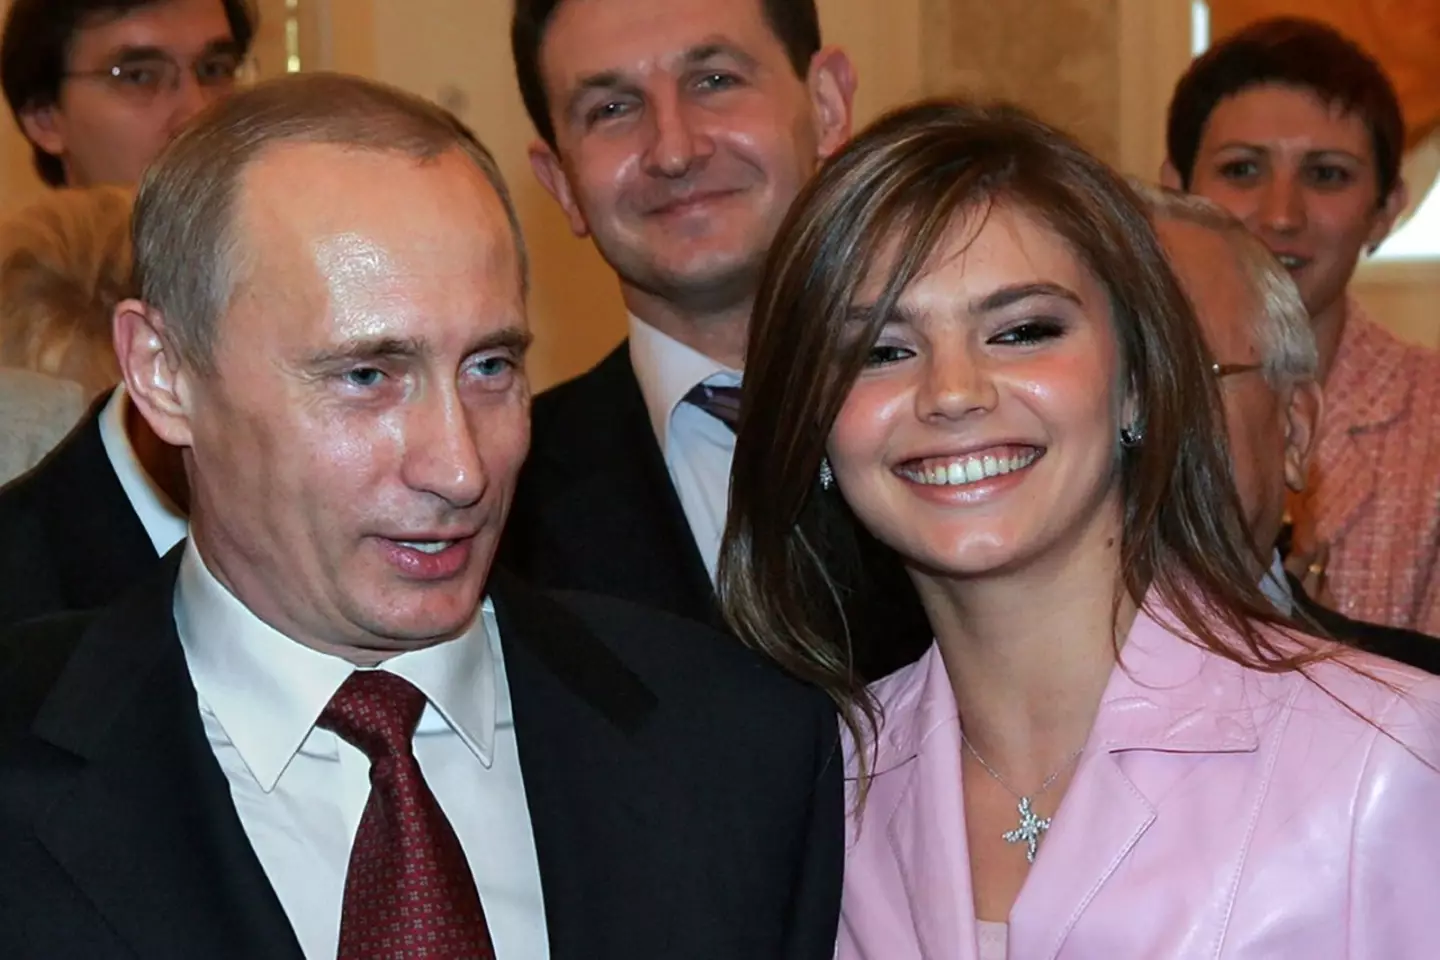 Kabaeva was first linked to Putin back in 2008.